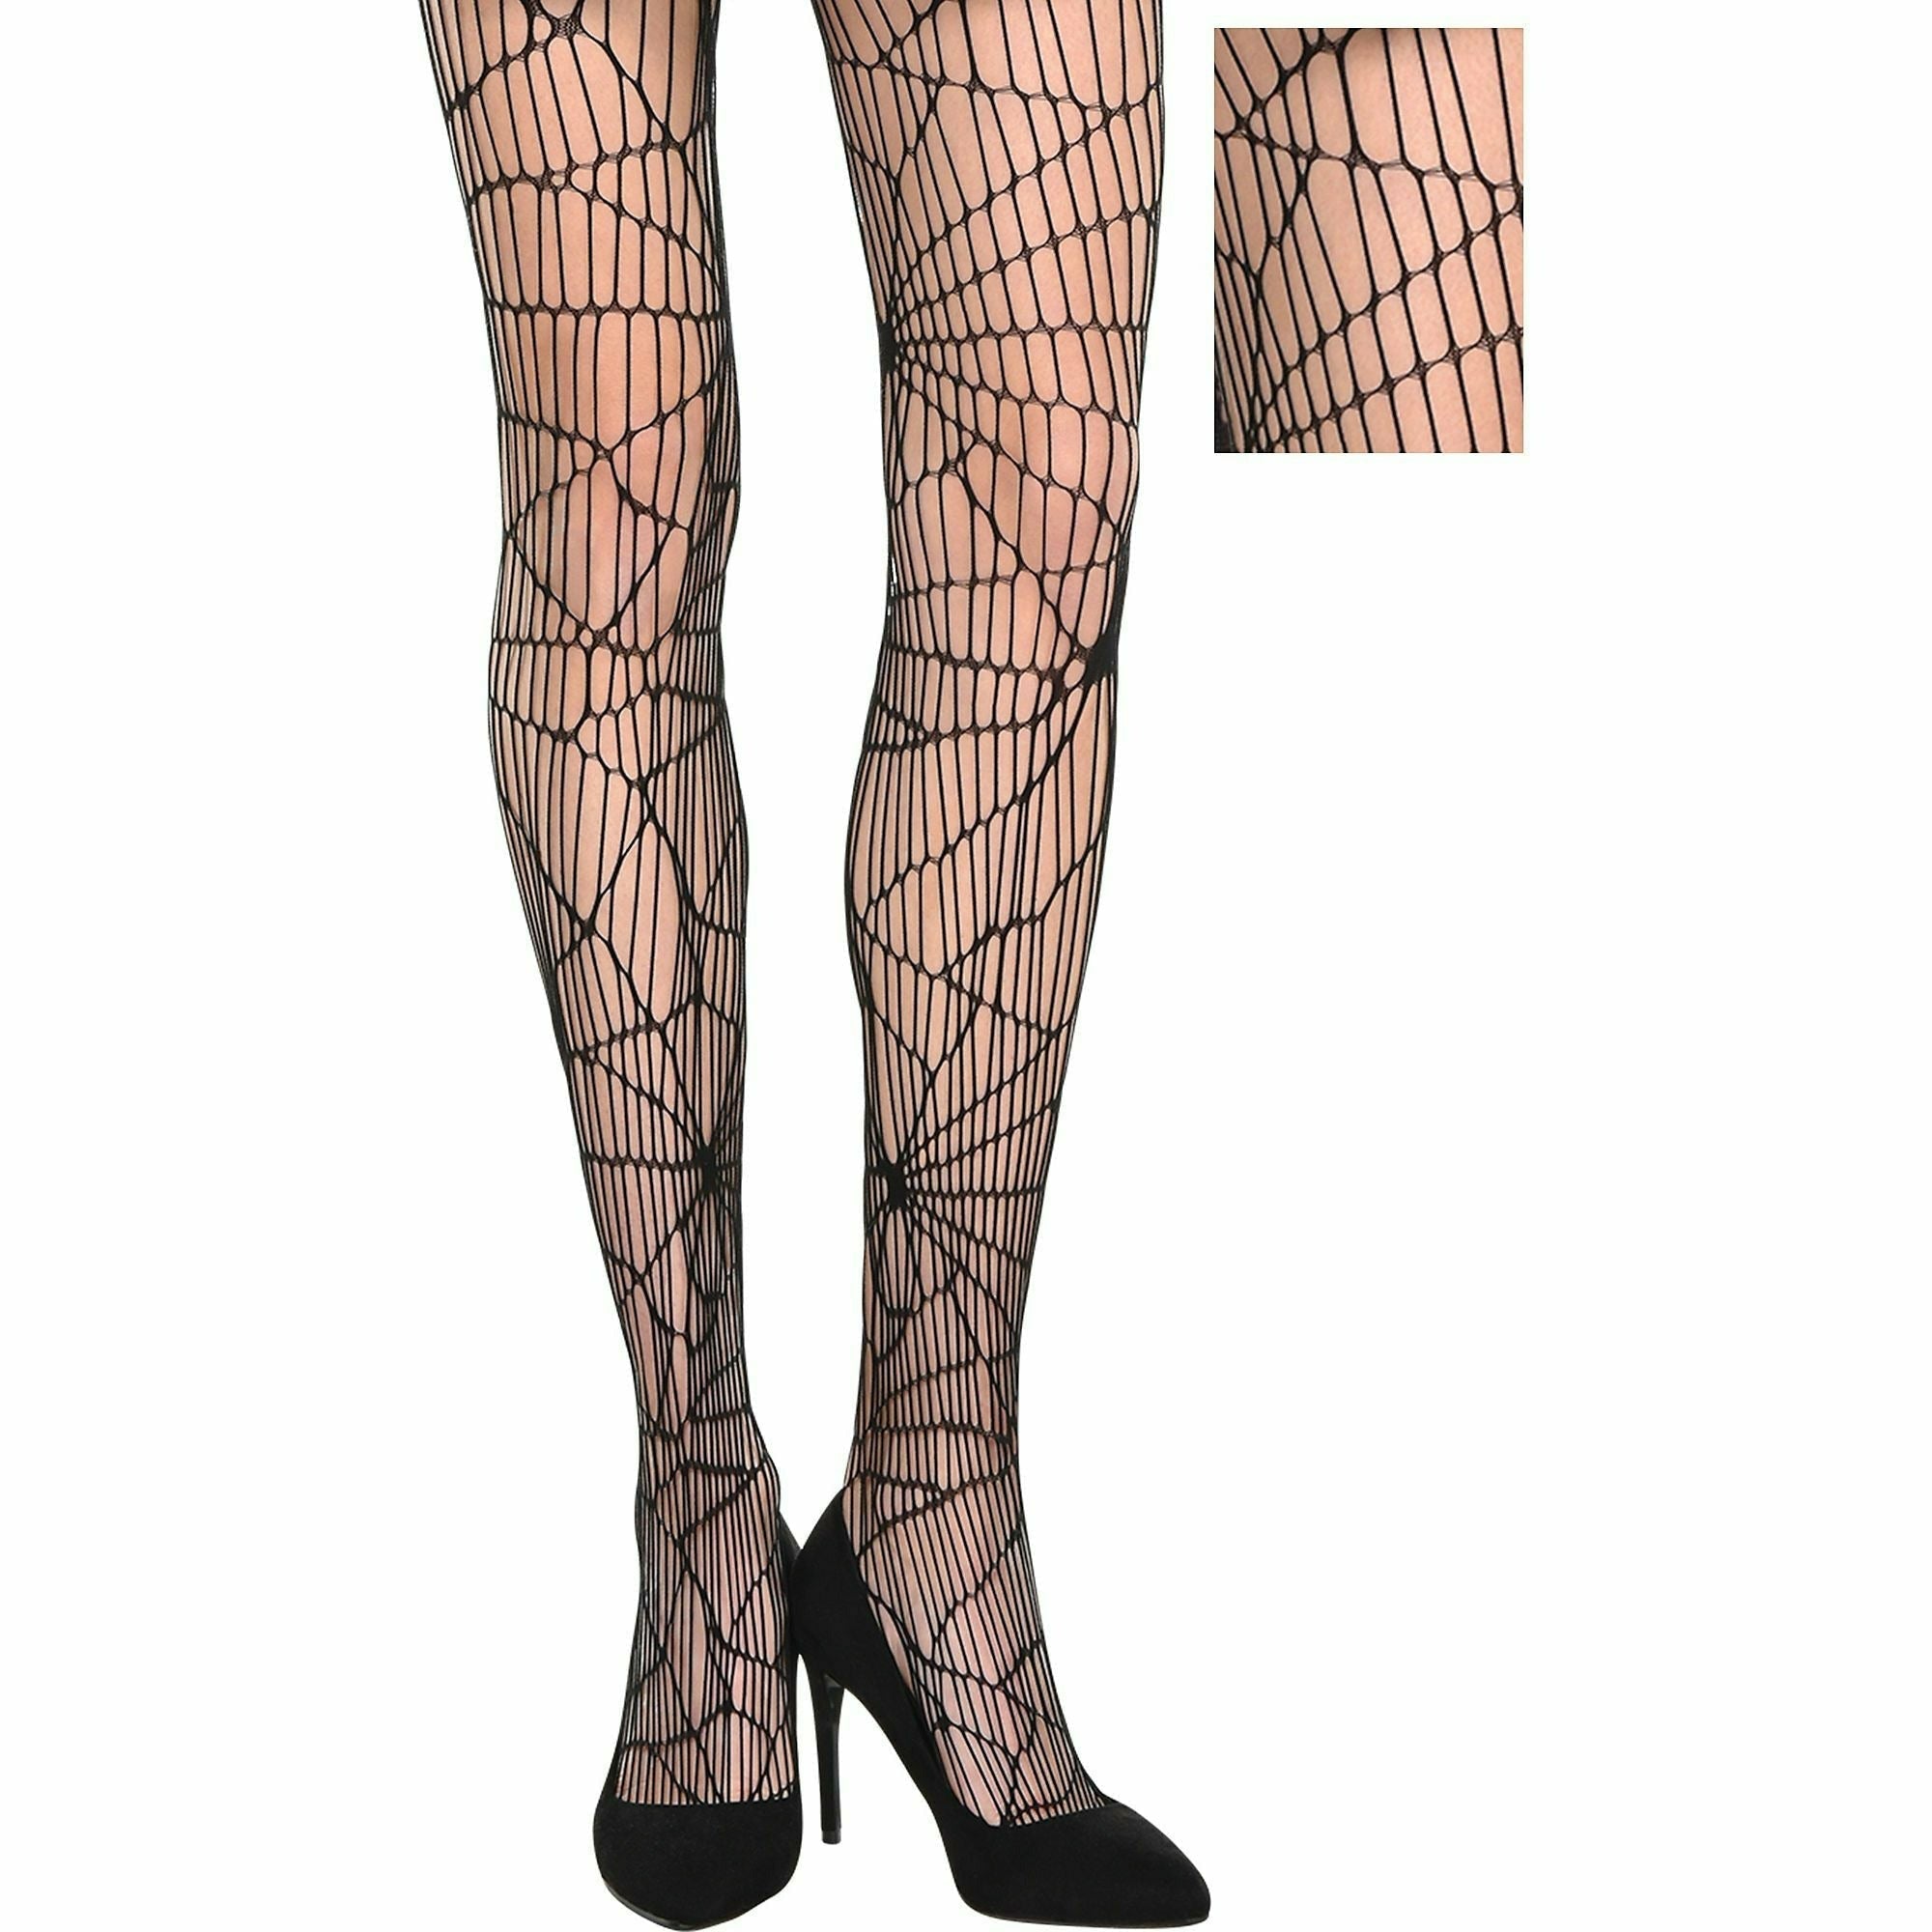 Party City COSTUMES: ACCESSORIES Black Net Tights